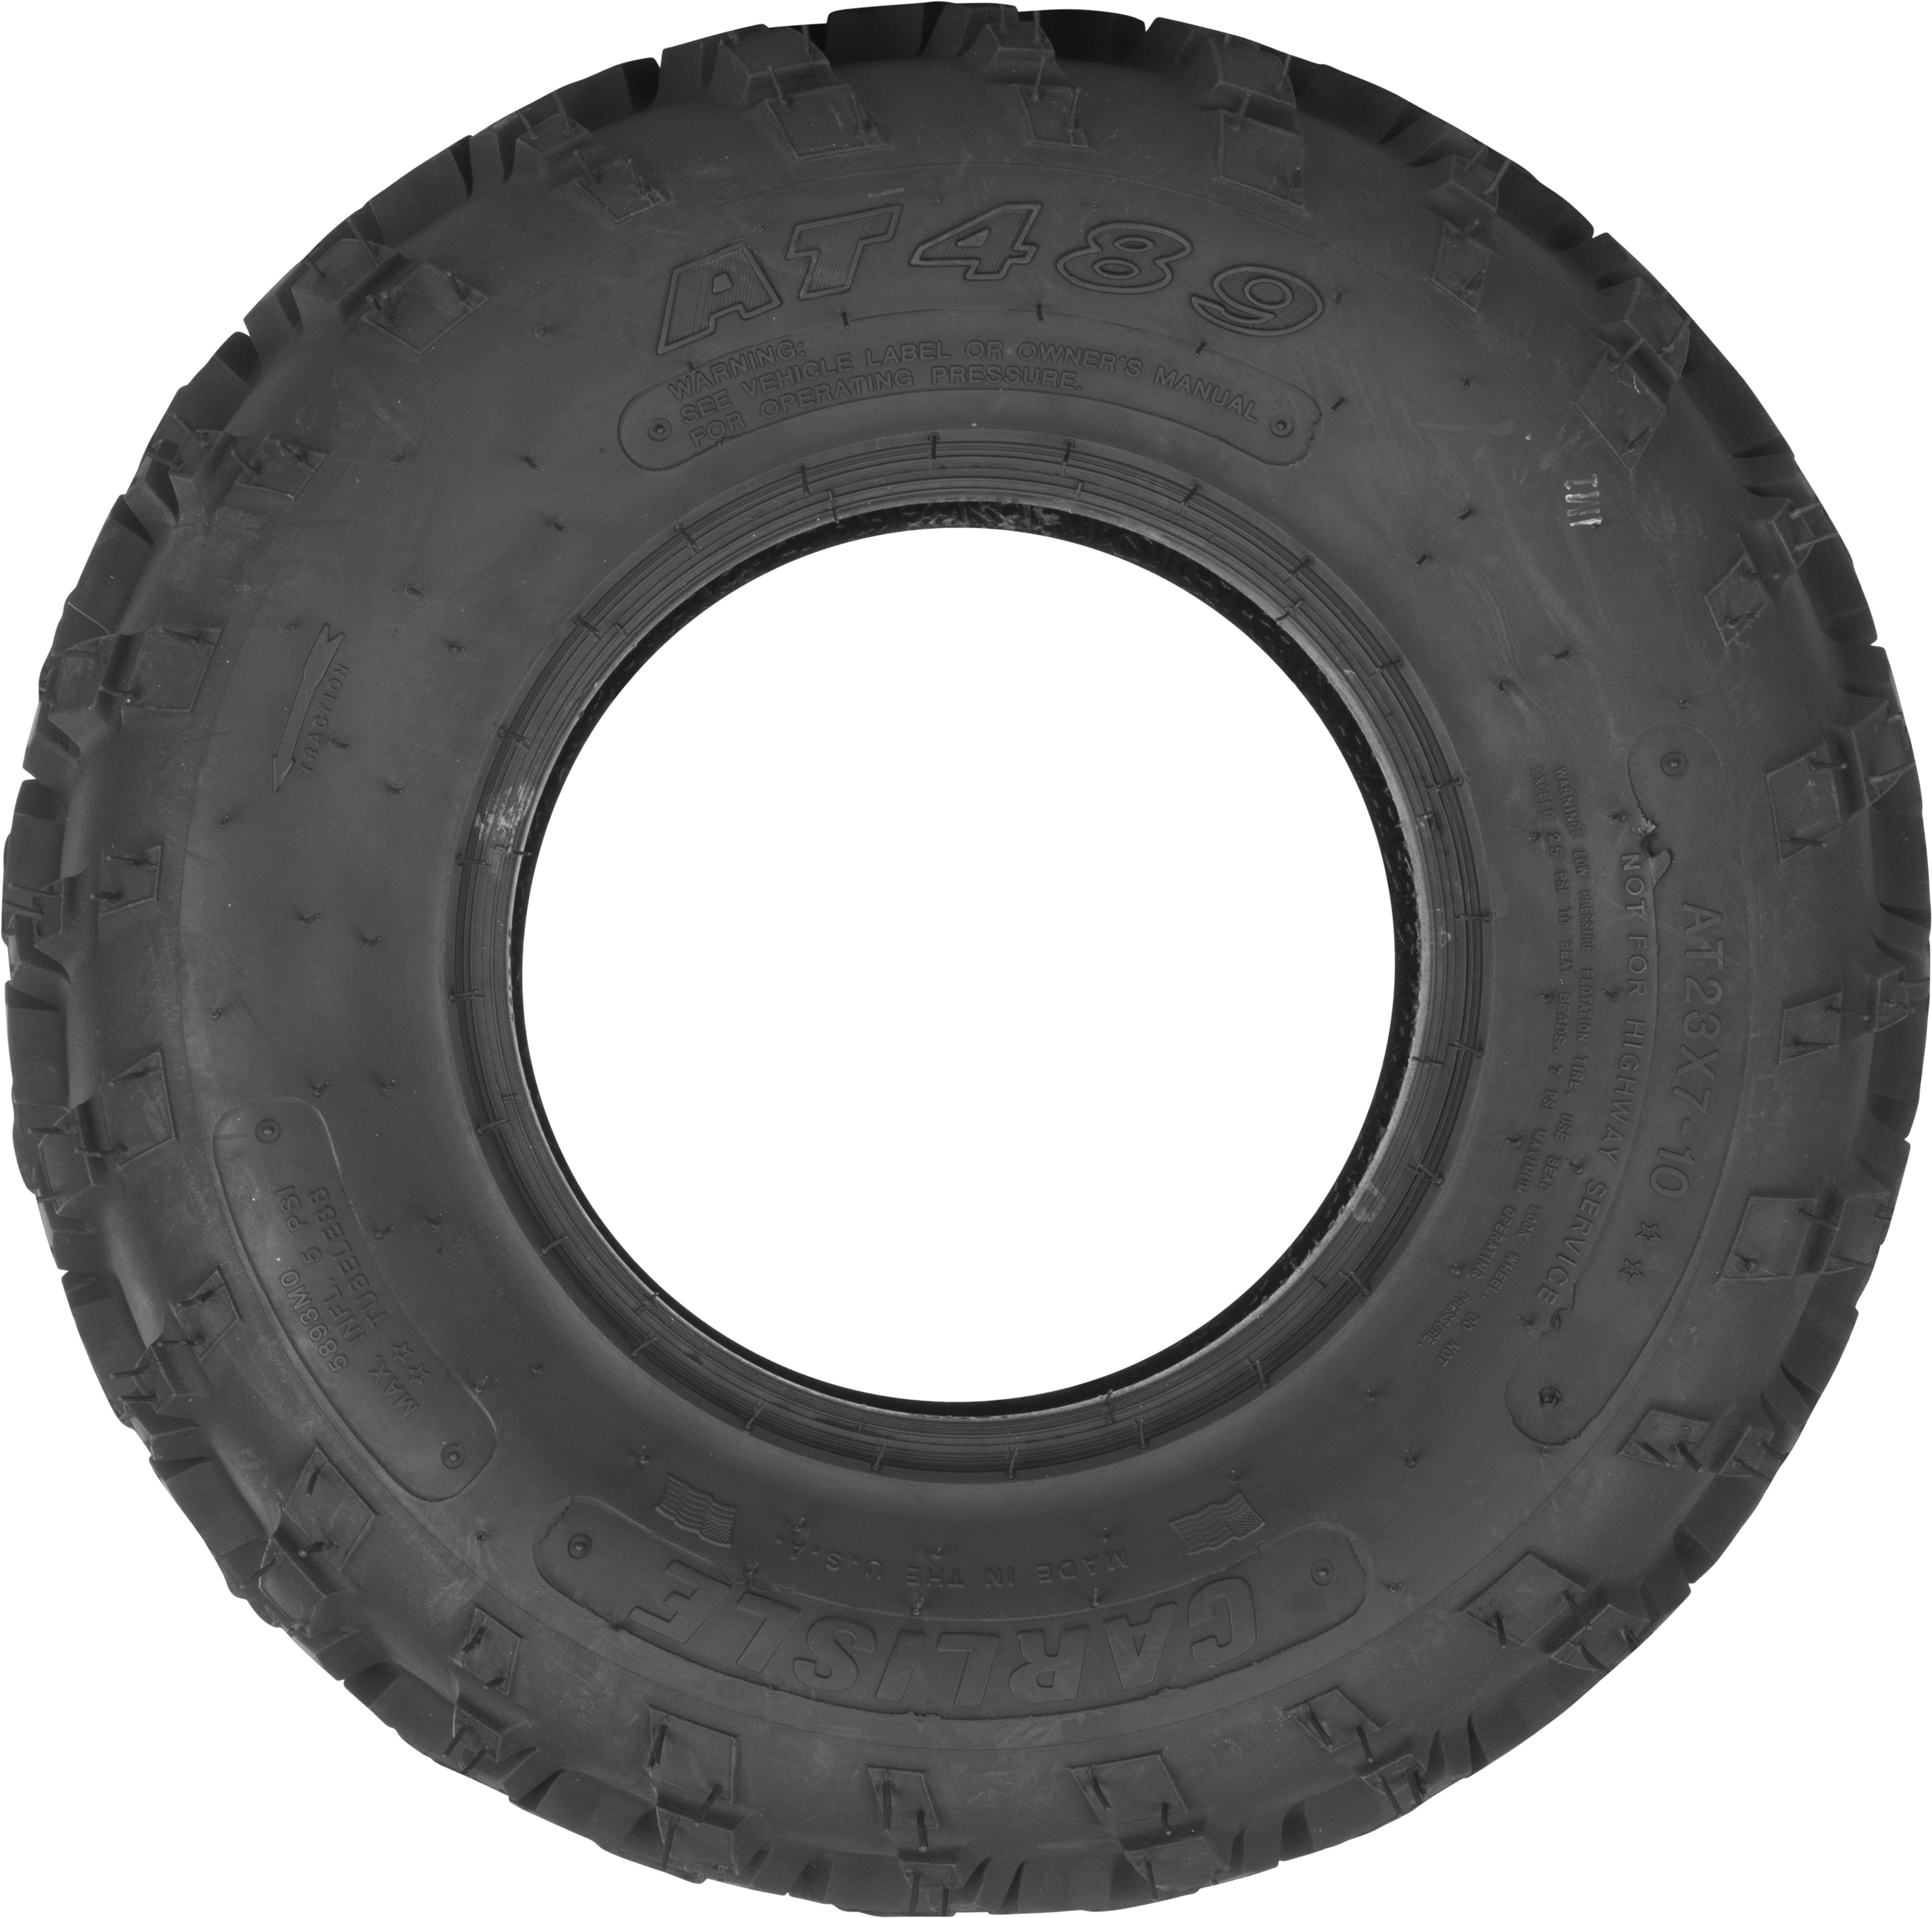 Tire At489 Front 24x8 12 Bias